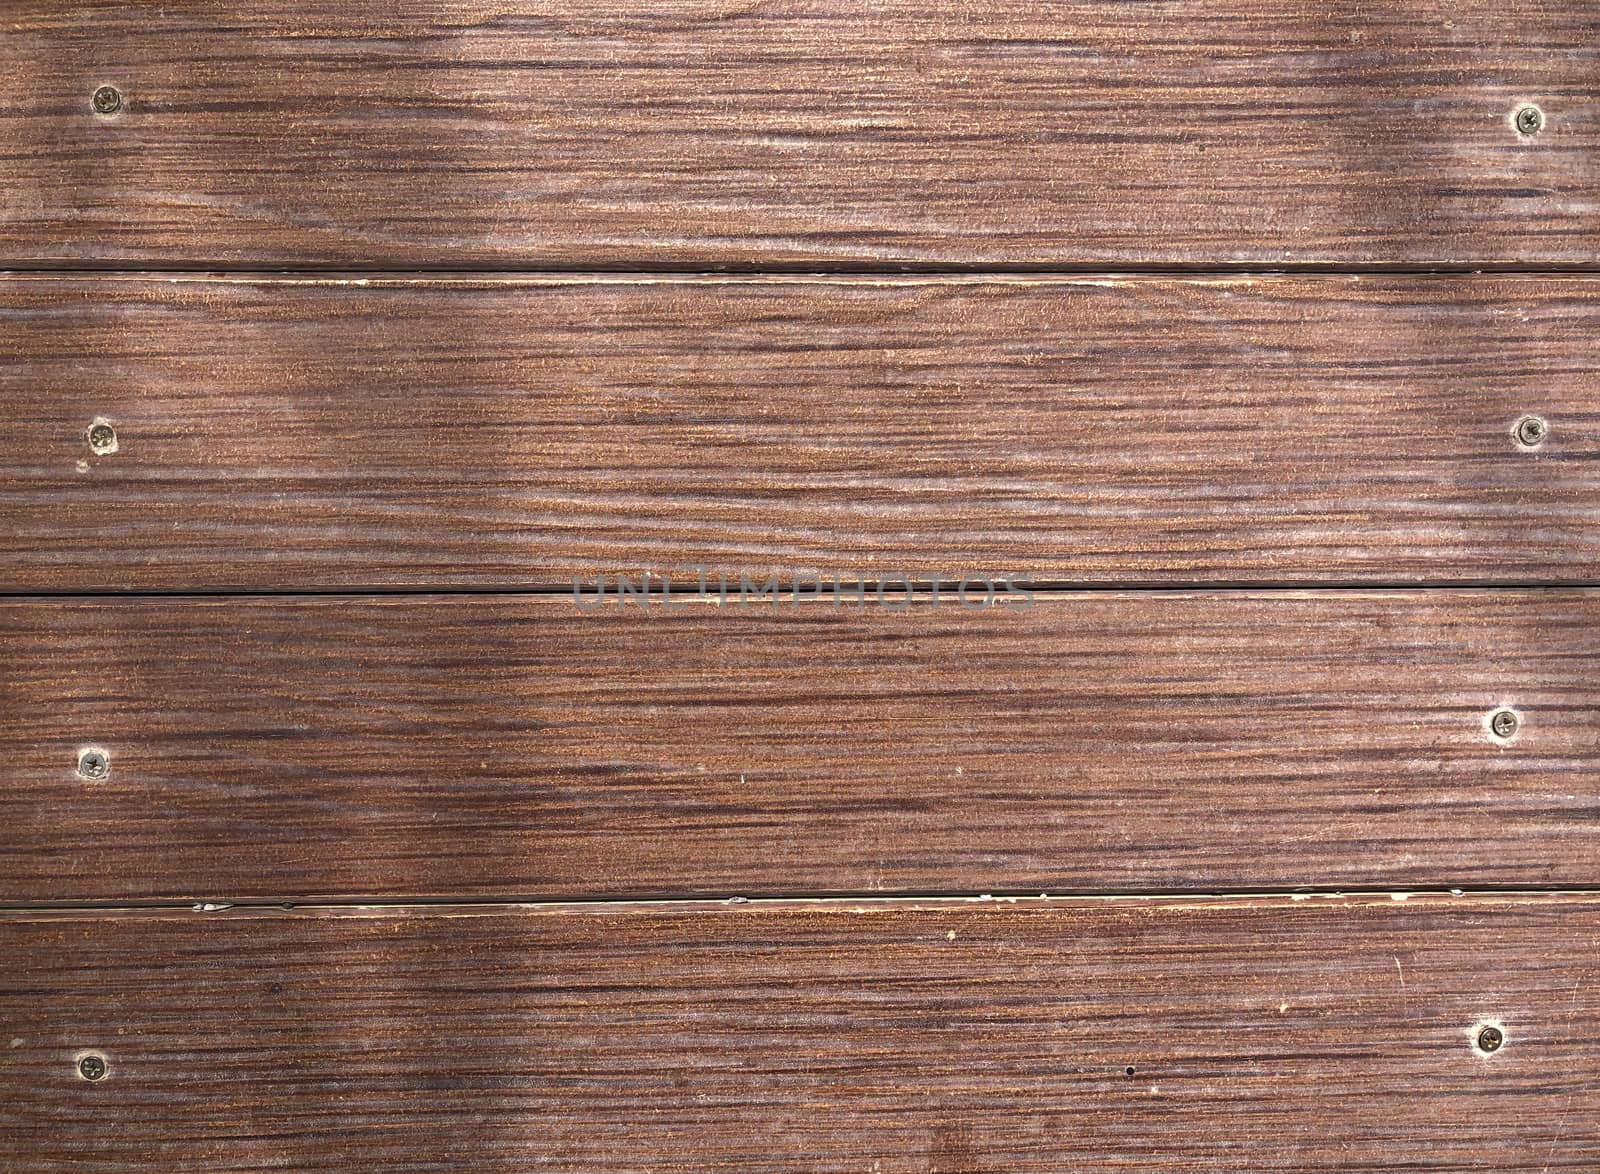 Abstract brown wooden surface with screws attached to the background, brown wood texture.